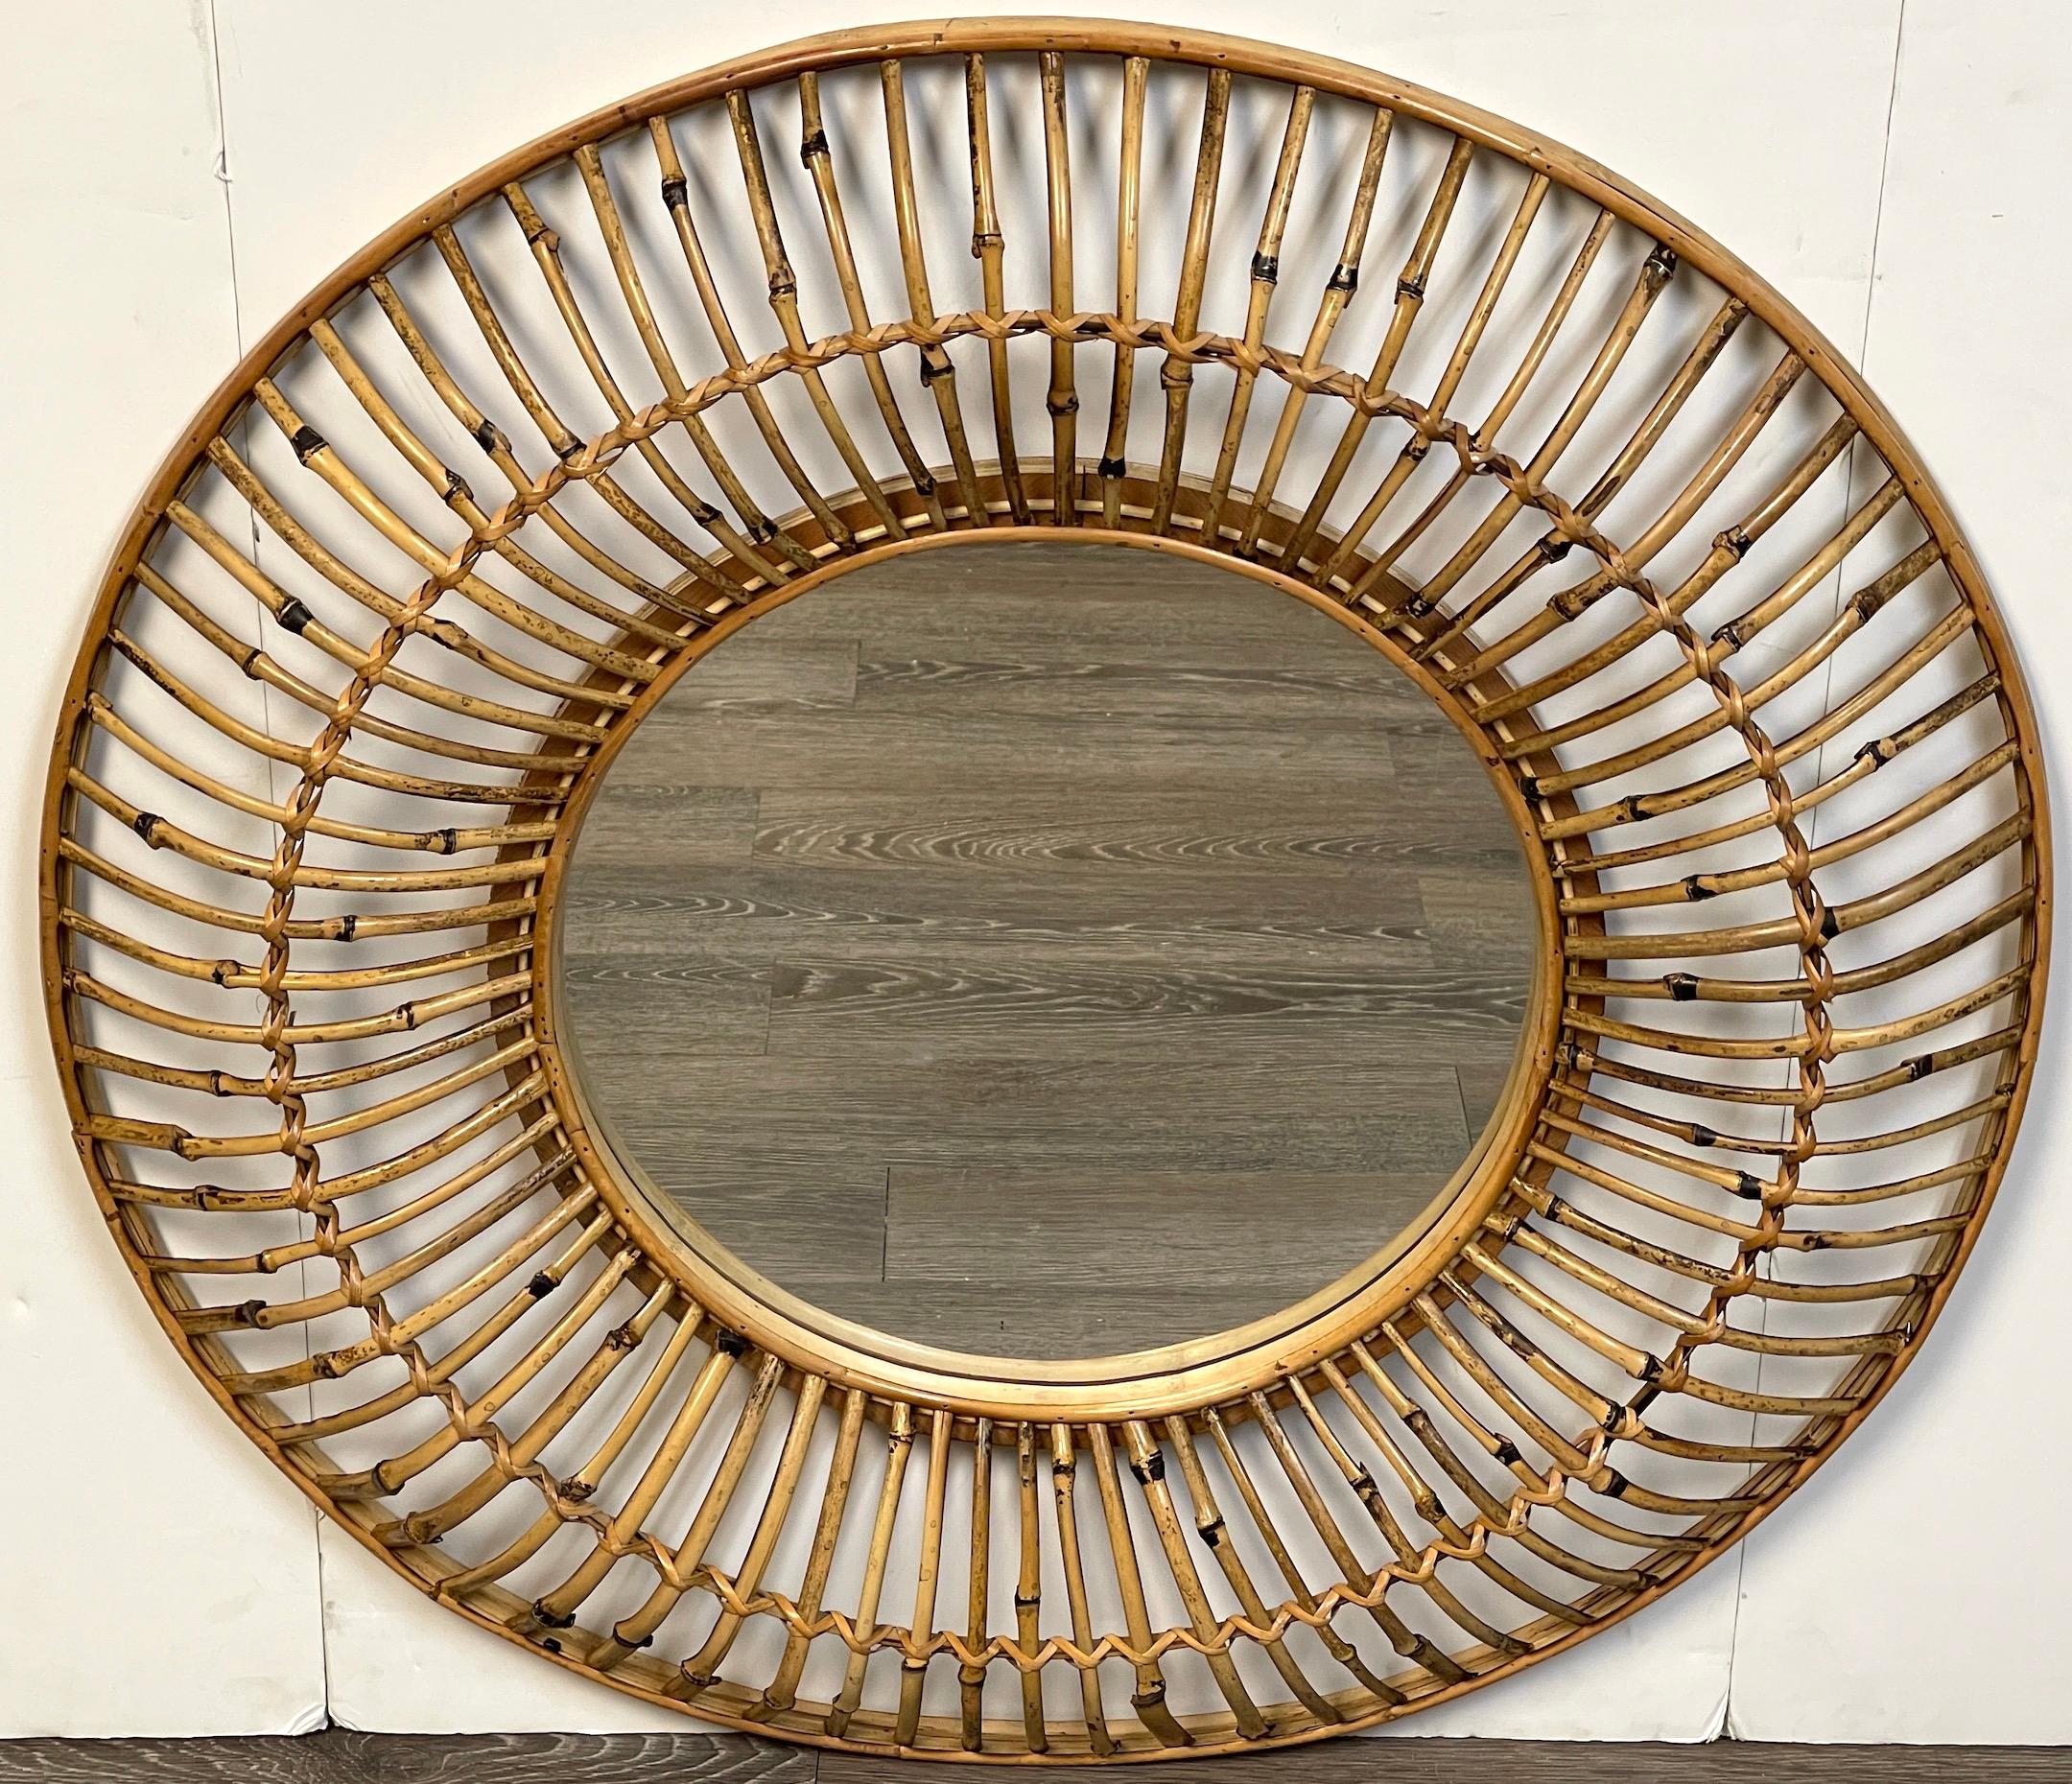 Albini style sunburst bamboo & rattan mirror
A fine example, well executed of a continuous surround of 3-inch high curved bamboo with appliqué double ribbon of woven reed and willow. Complete with a 15-Inch inset clear mirror. 

